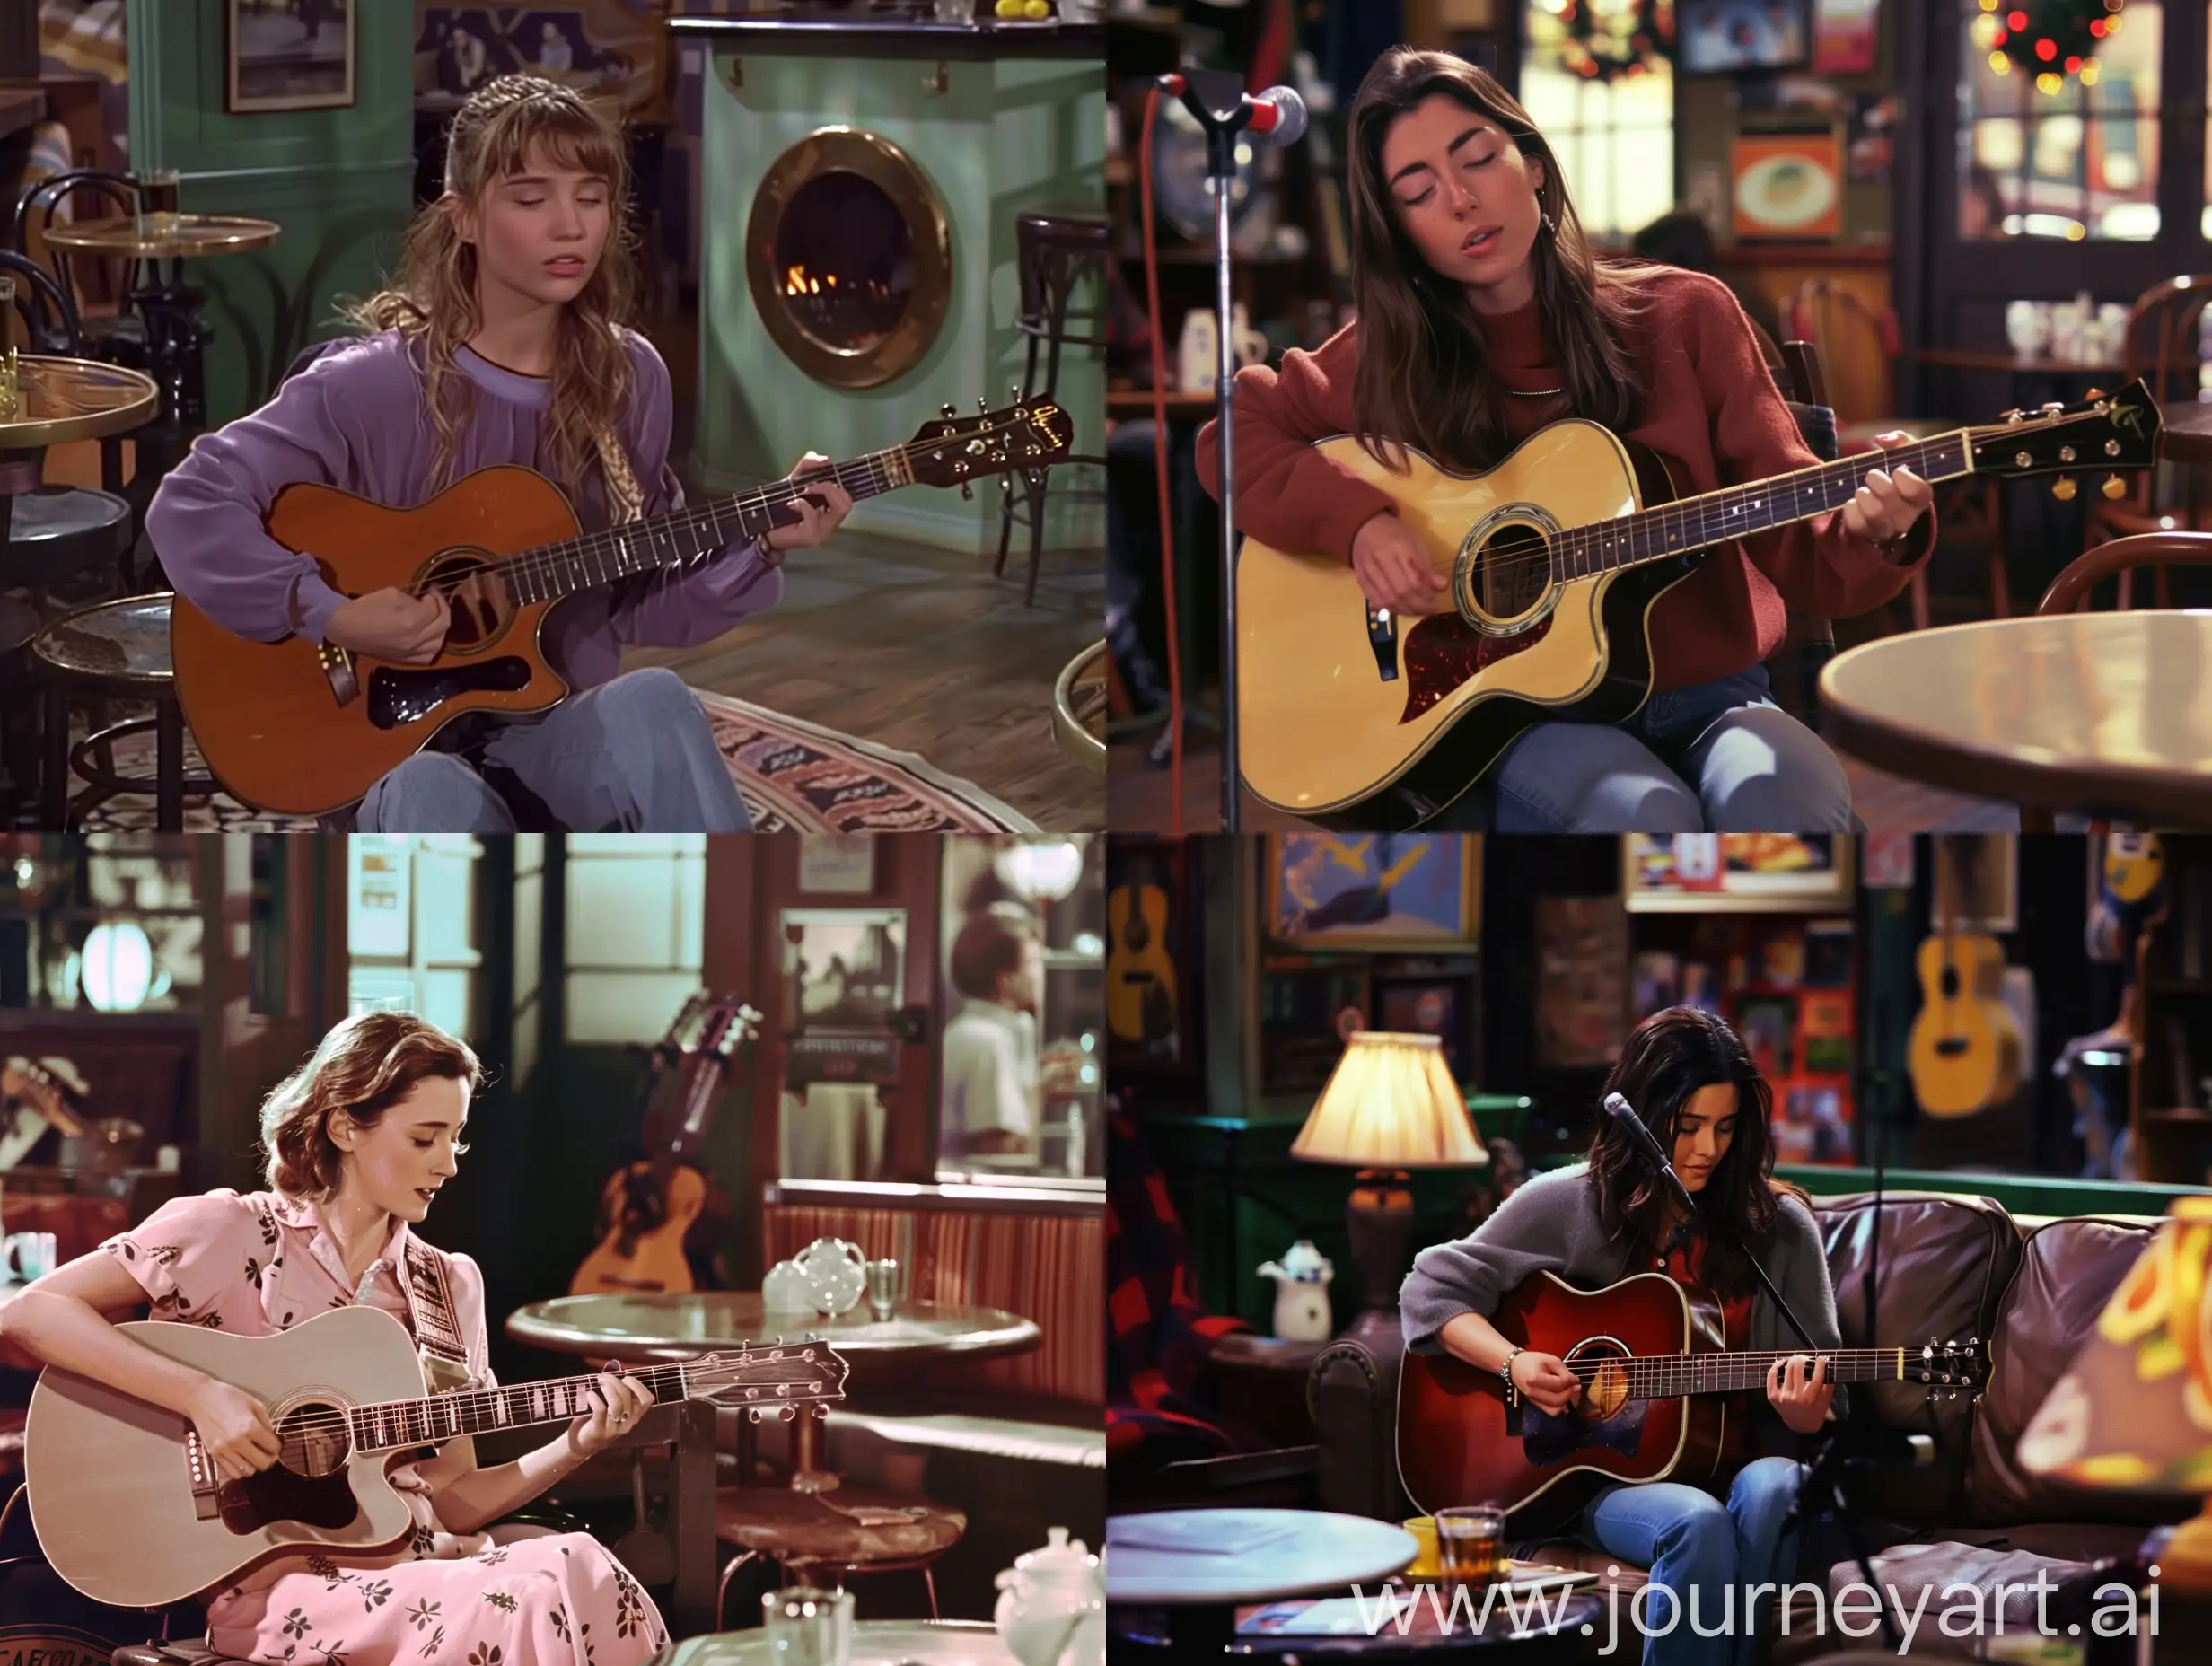 Phoebe Buffay playing guitar at Central Perk Cafe from friends,1950's super panavisison 70 , colory image